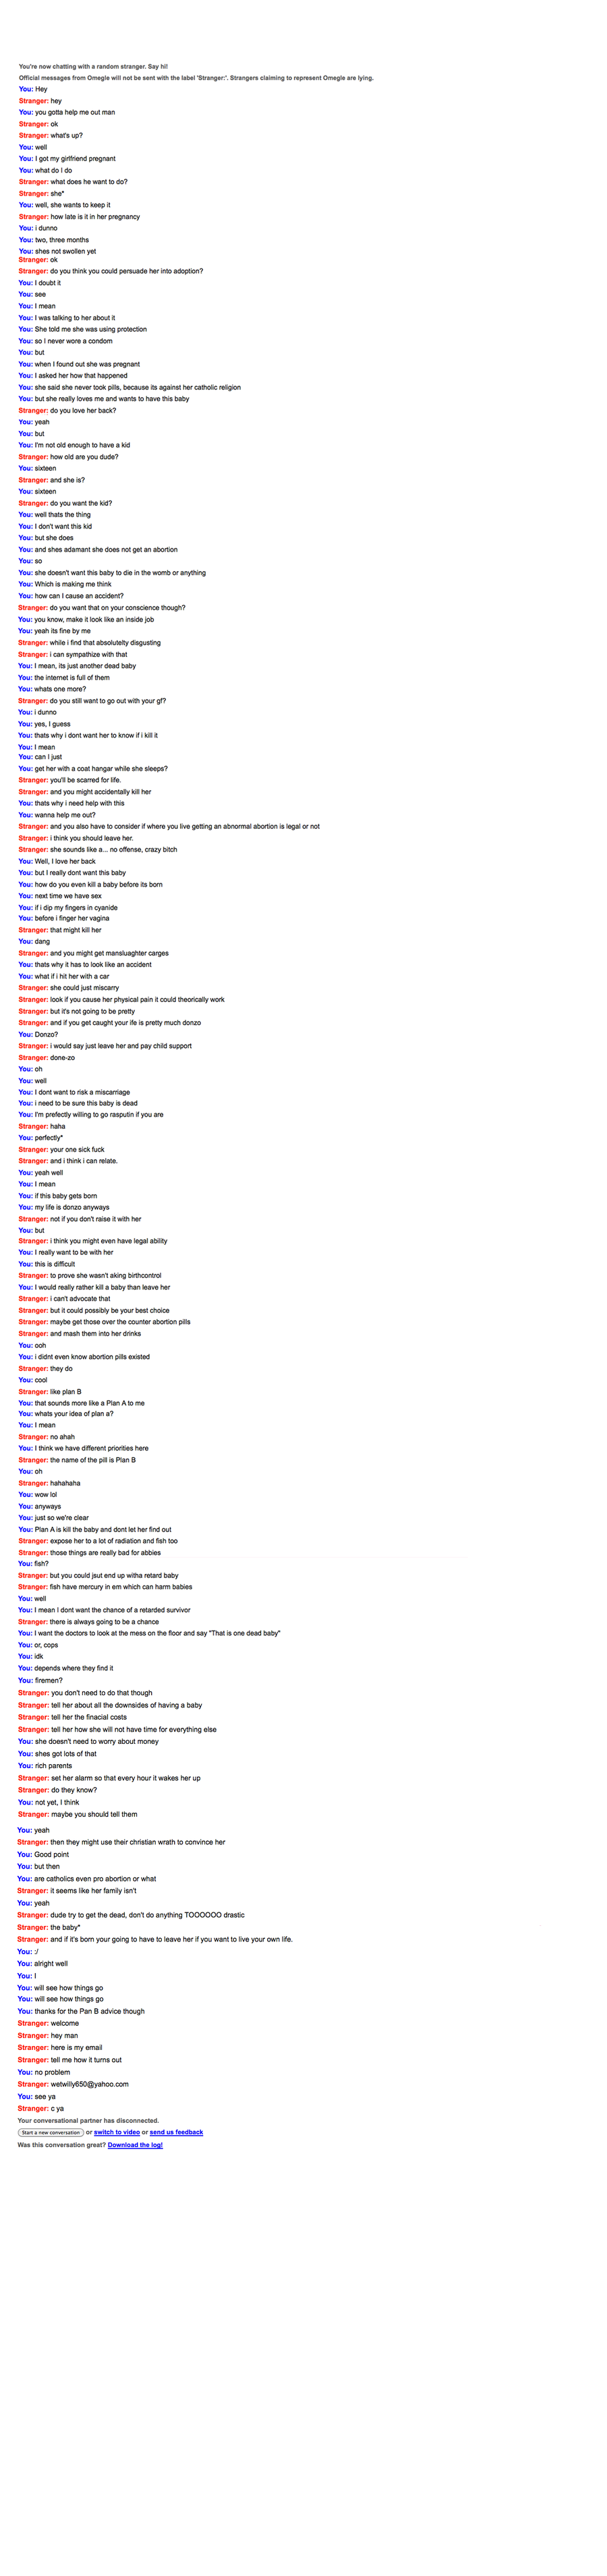 omegle_conversation_by_barritonegroan-d35tmcs.png